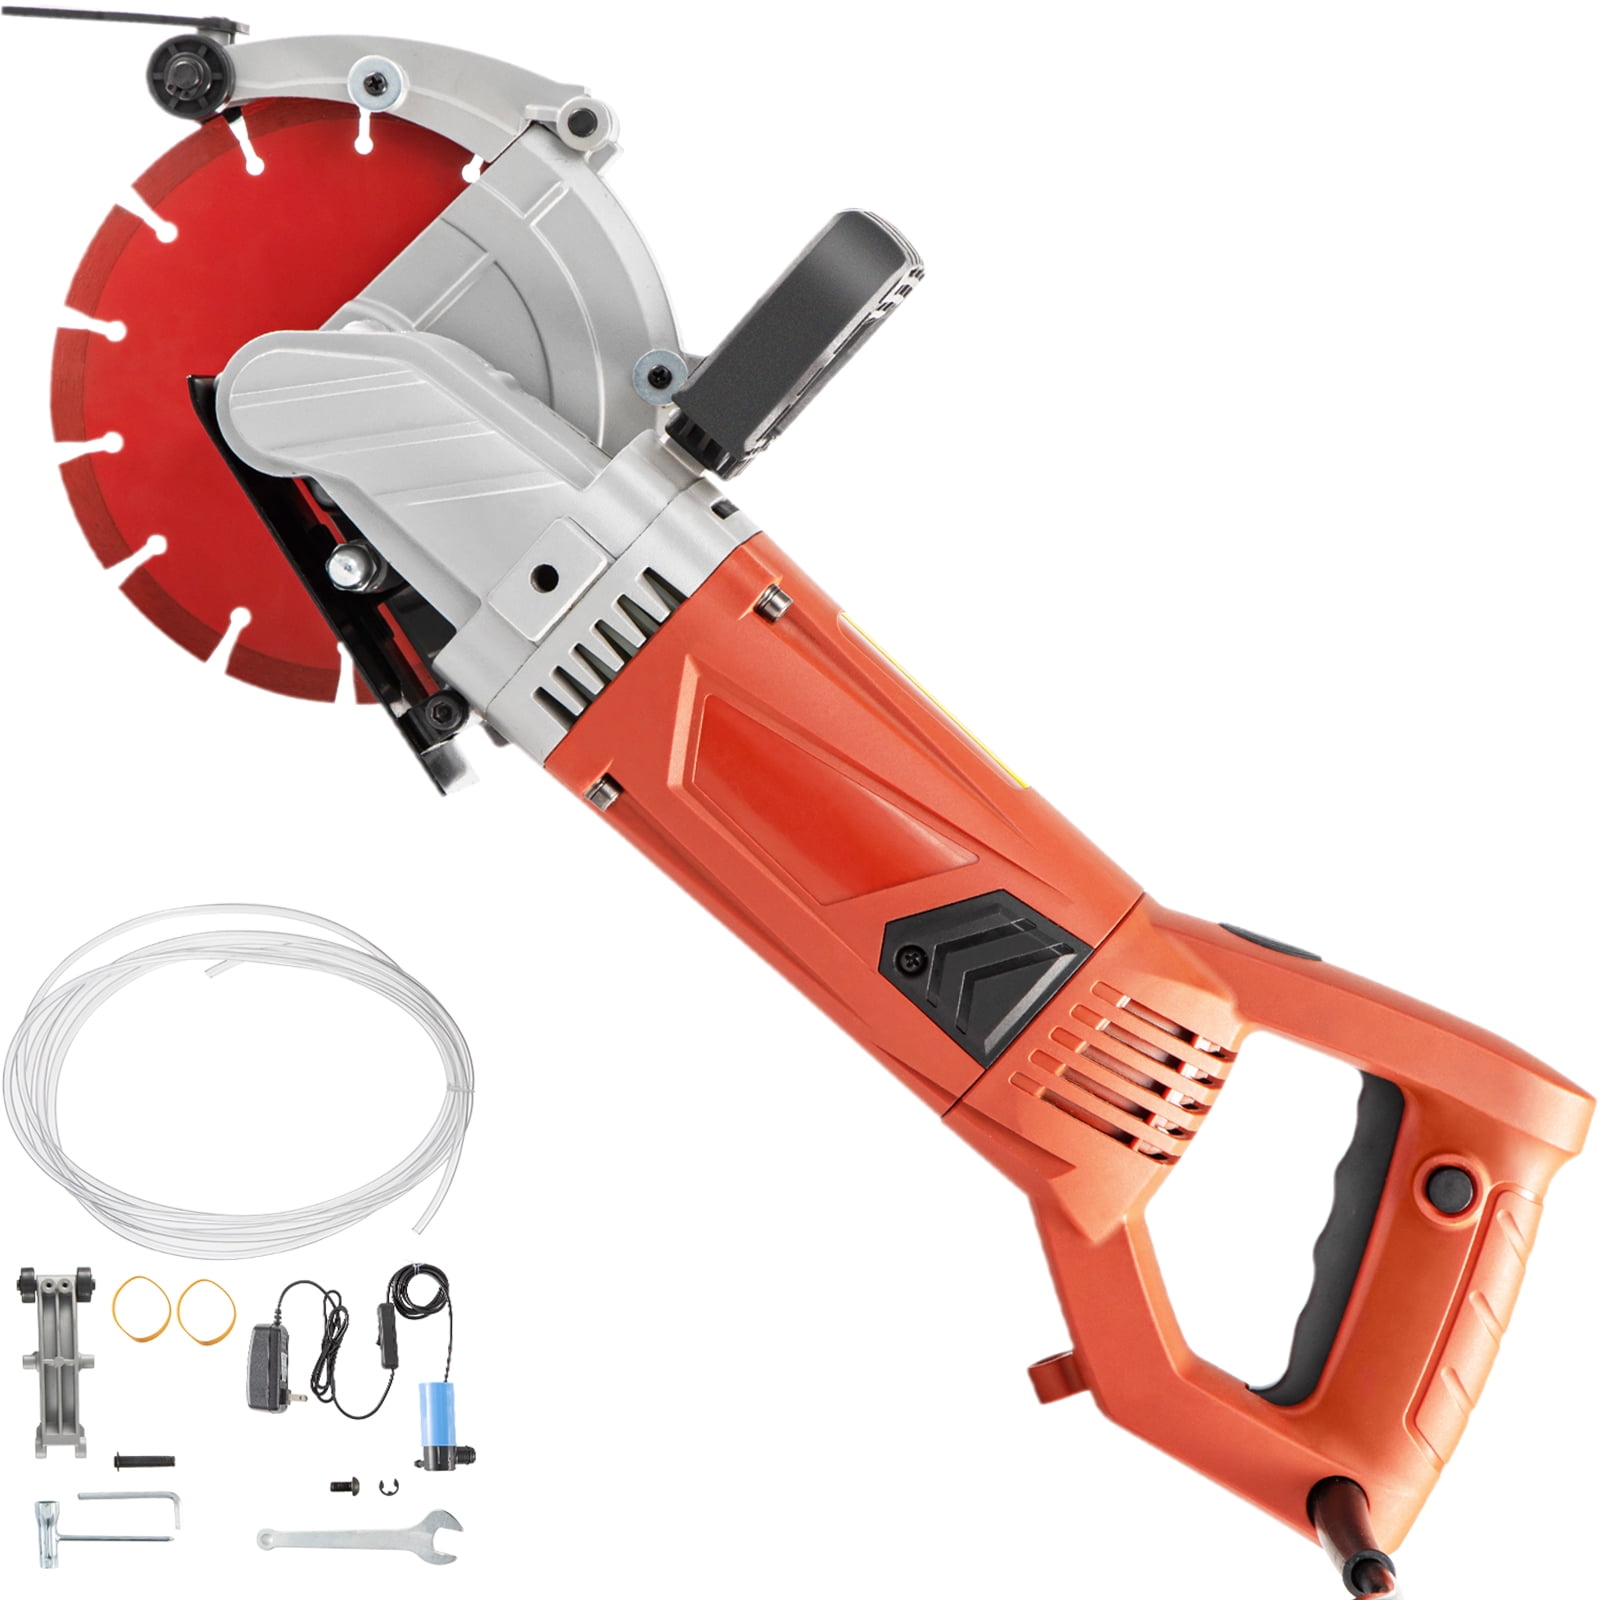 Details about   14" Portable Concrete Saw 3200W Corded Electric 4100 RPM w/ Water Pump & Blade 